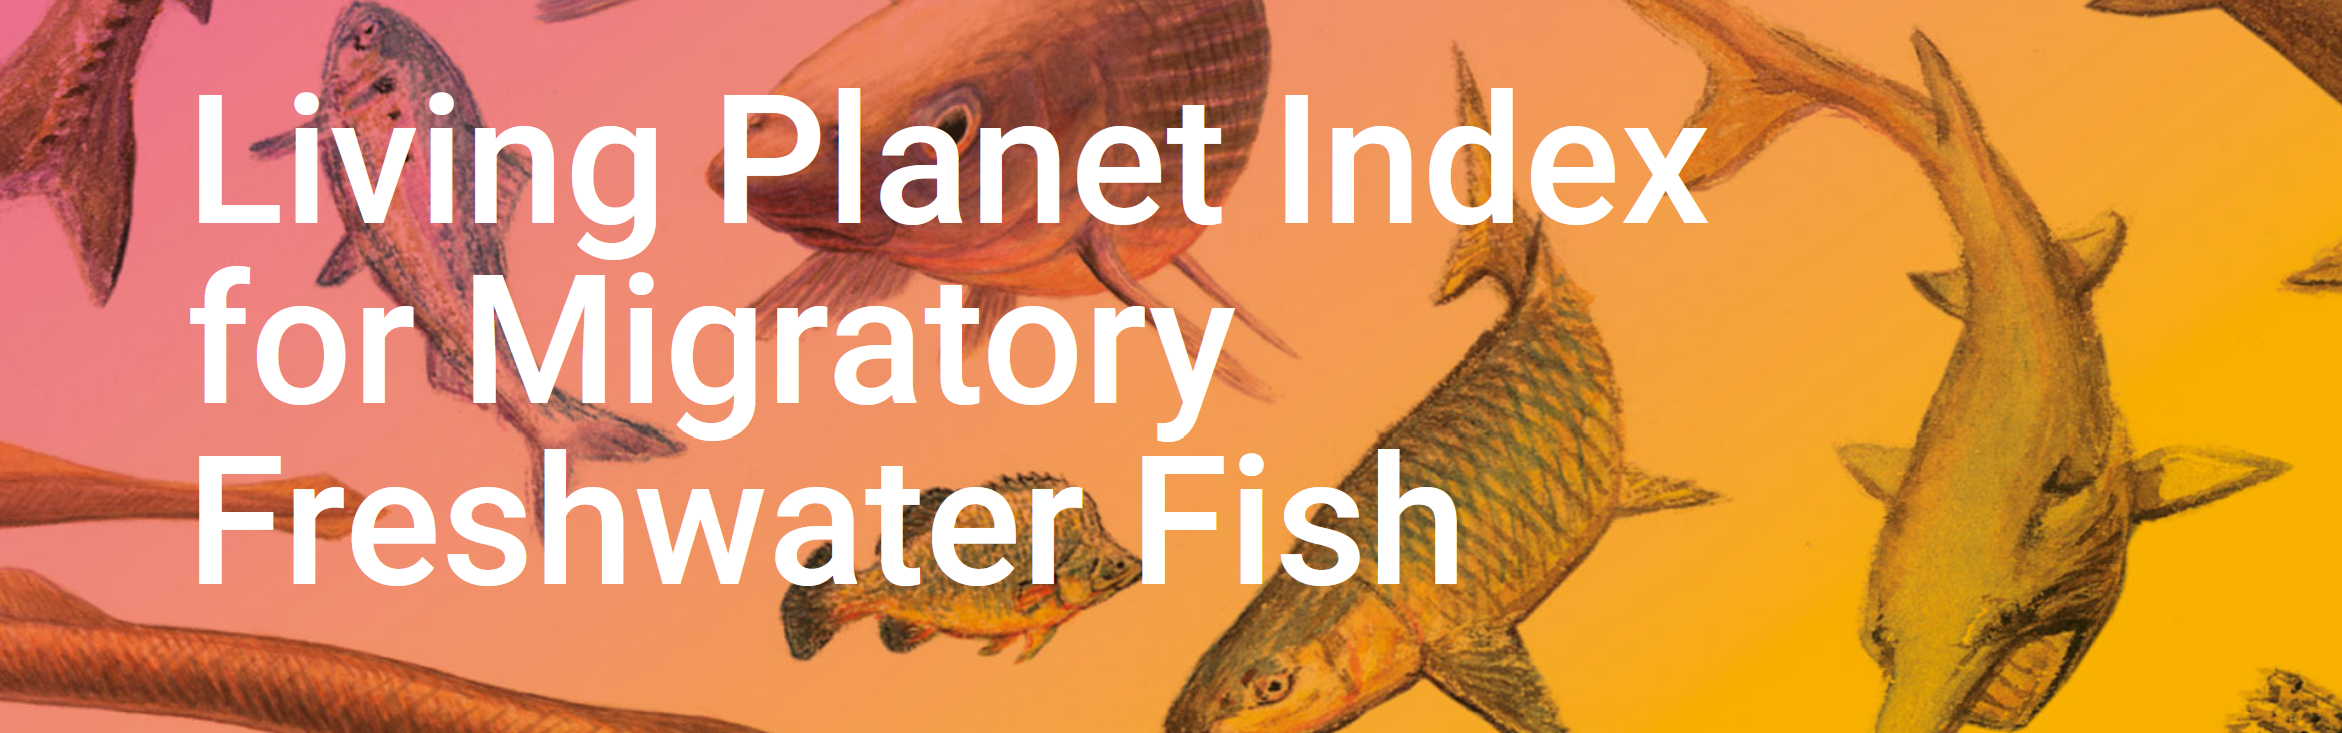 Living Planet Index for Migratory Freshwater Fish Update